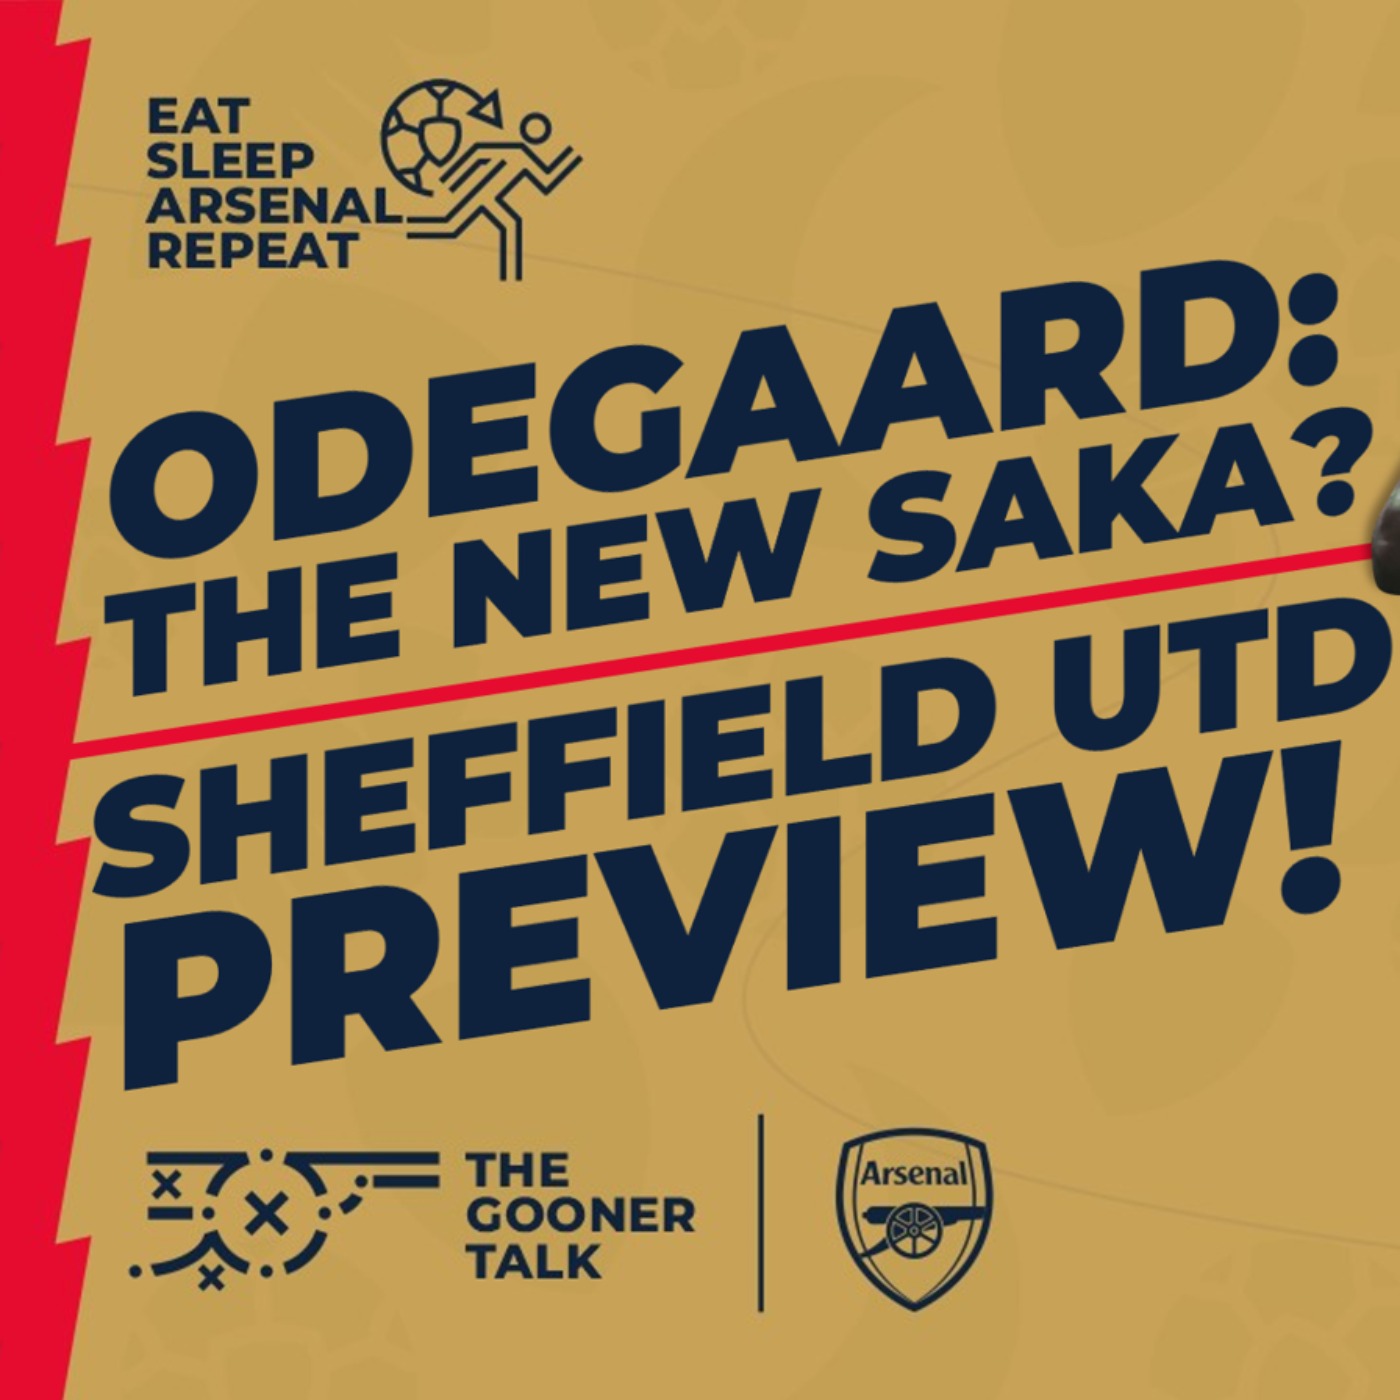 Is Odegaard The New Saka? Sheffield United Preview! | Eat, Sleep, Arsenal Repeat!